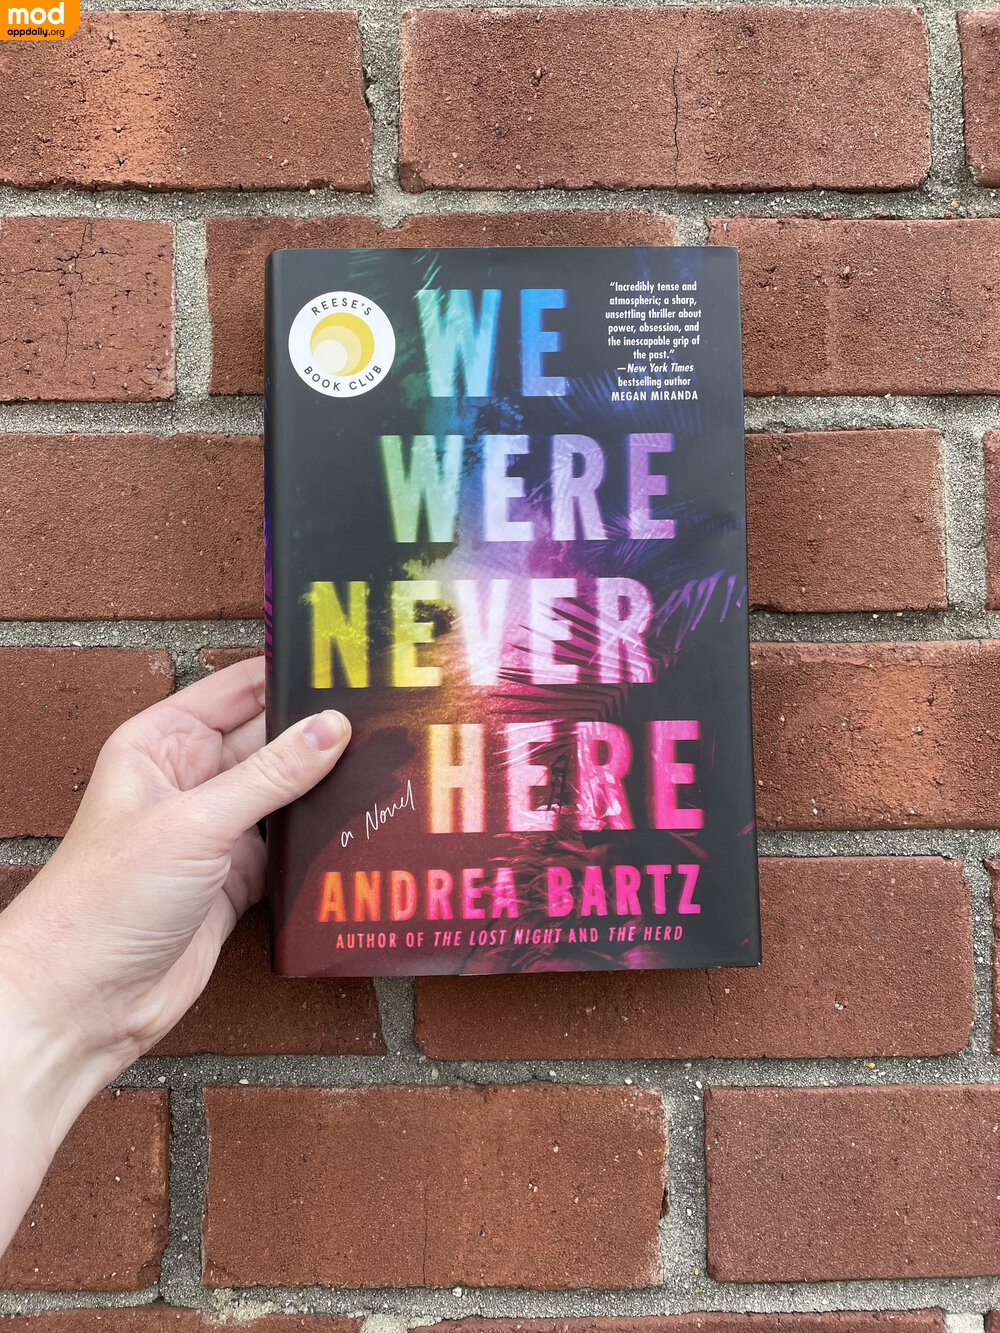 Chapters 1 – 3 of We Were Never Here Ending